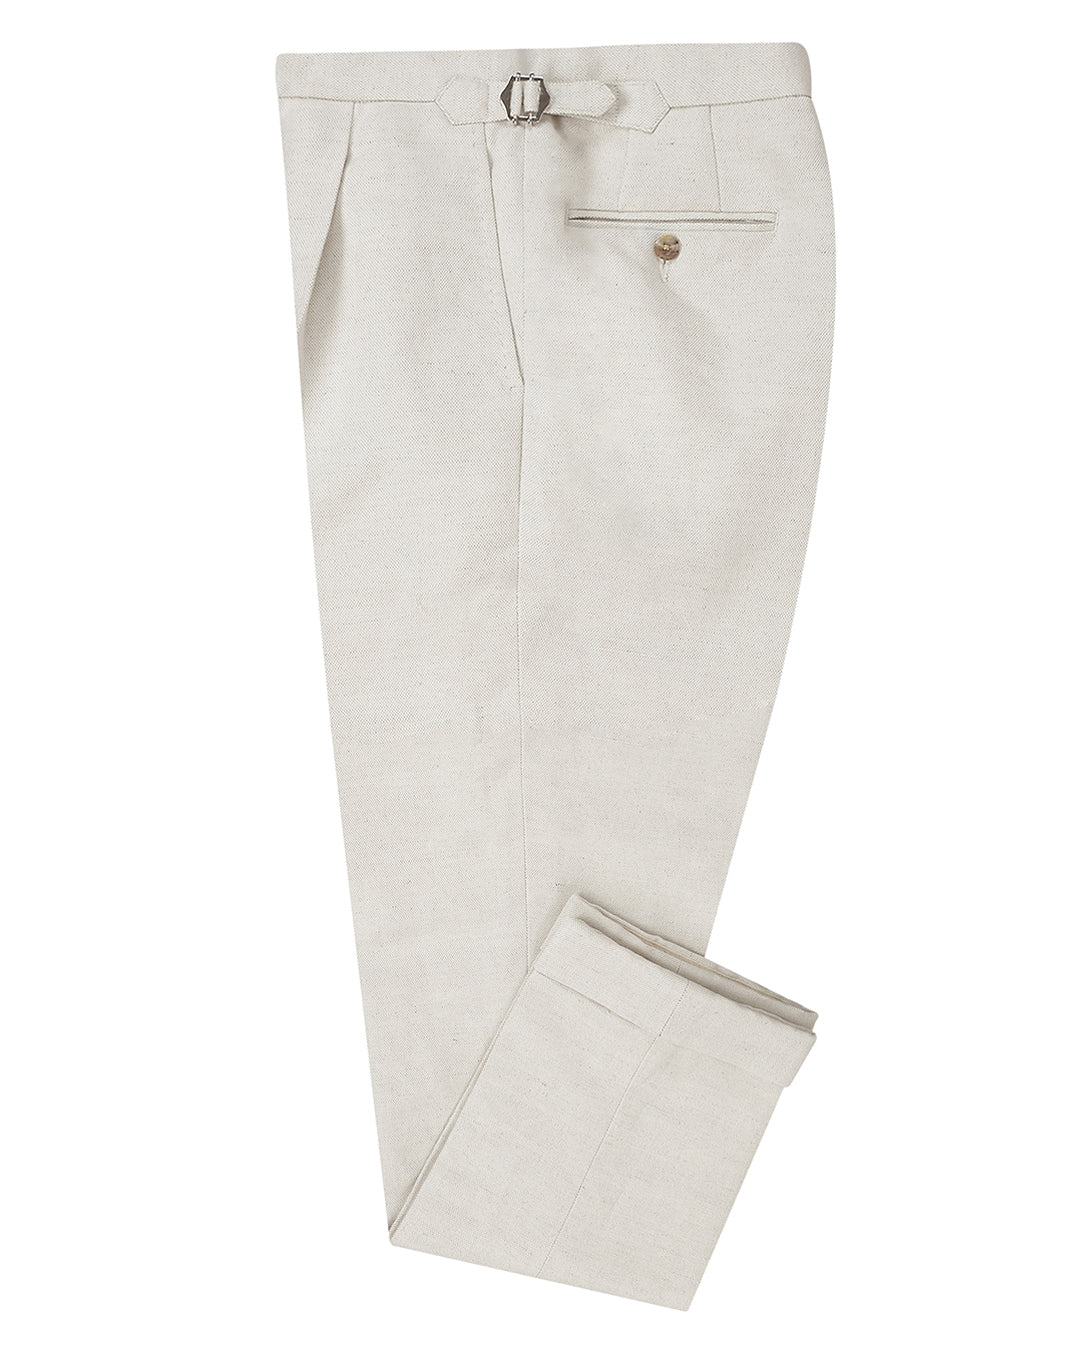 Side view of custom linen pants for men by Luxire in cream